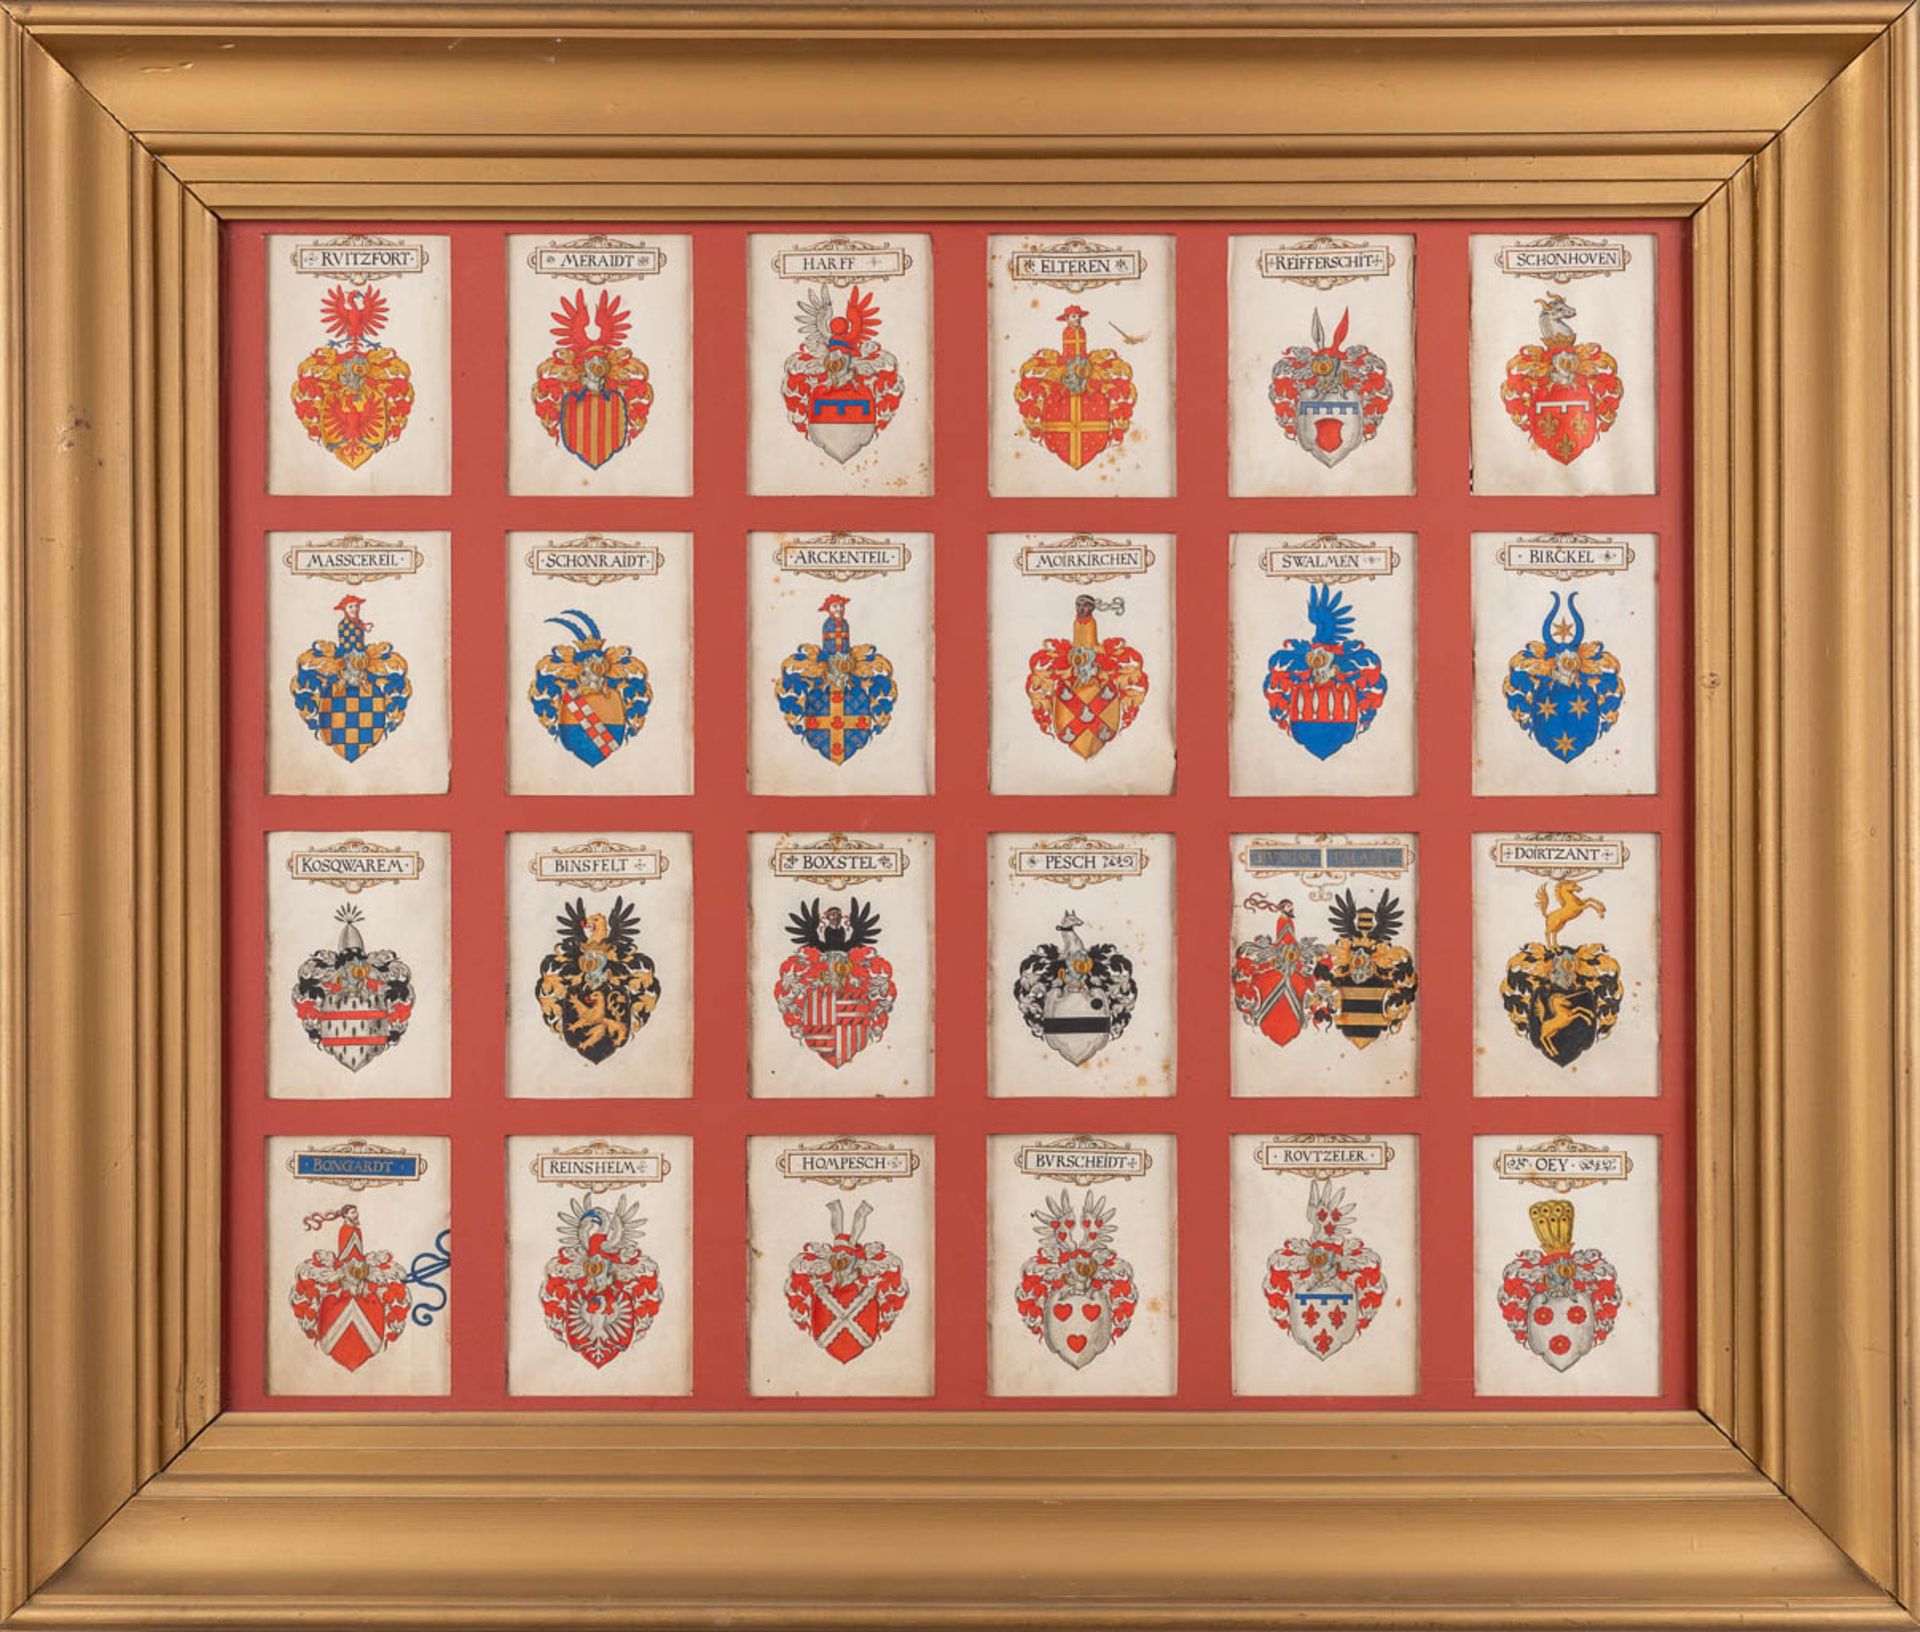 A frame with 24 hand-painted family crests and coat of arms , oil on paper. (W:98 x H:83 cm)